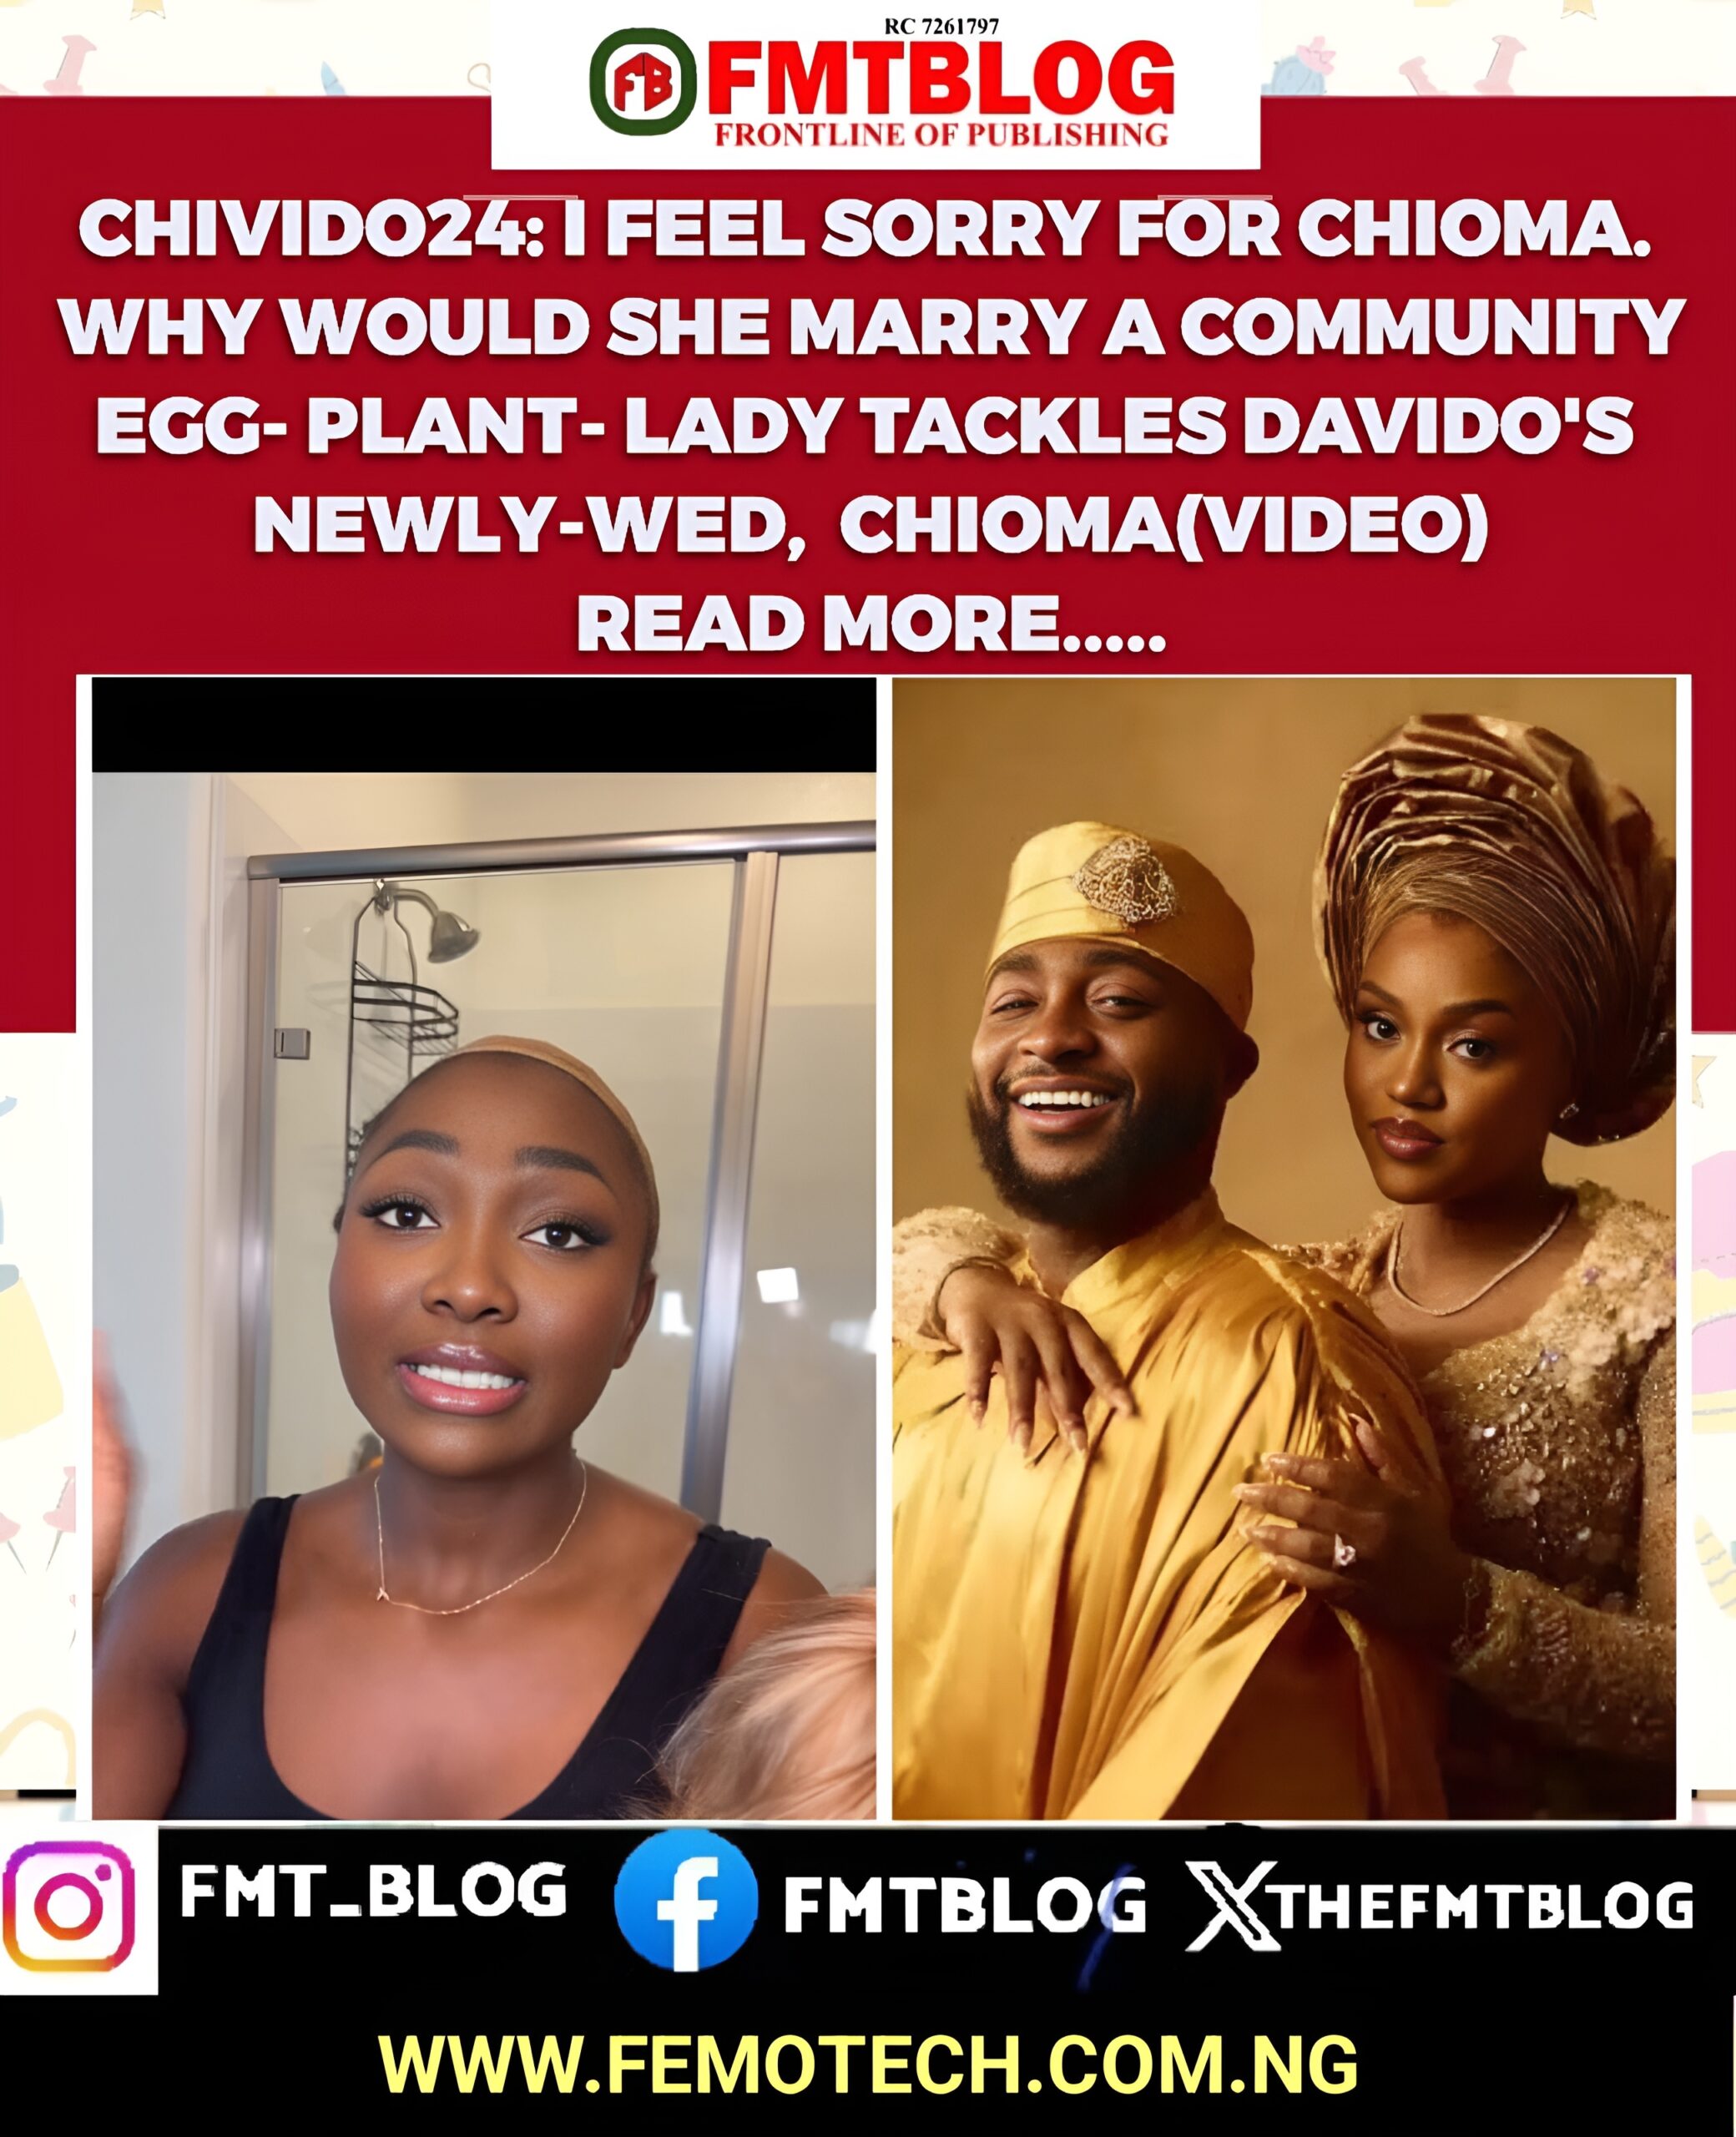 CHIVIDO24- I Feel Sorry For Chioma.Why Would She Marry A Community Egg-Plant- Lady Tackles Davido’s Newlywed, Chioma(VIDEO)